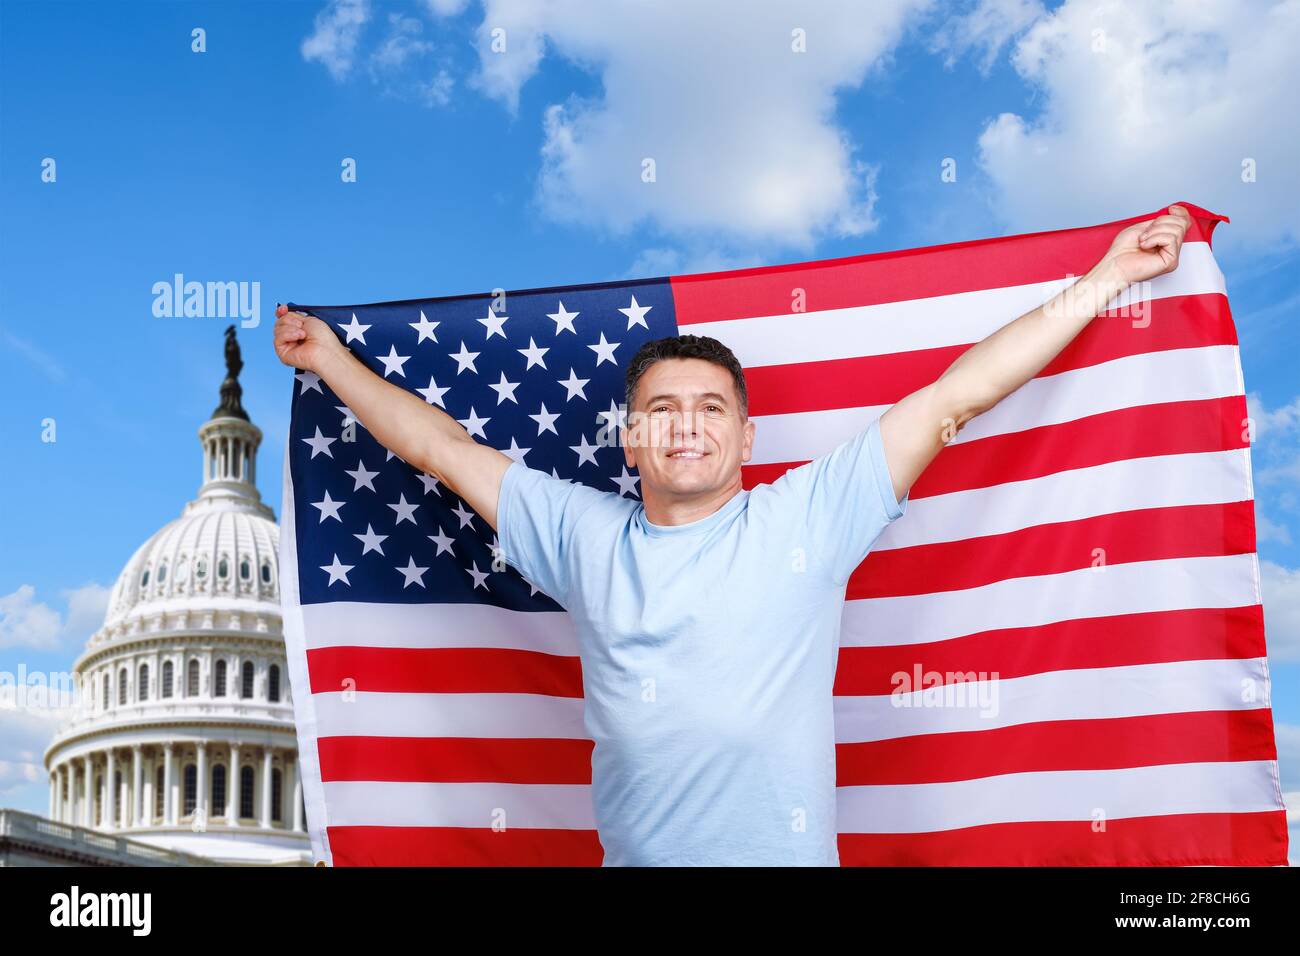 Man holds American flag in outstretched arms Stock Photo